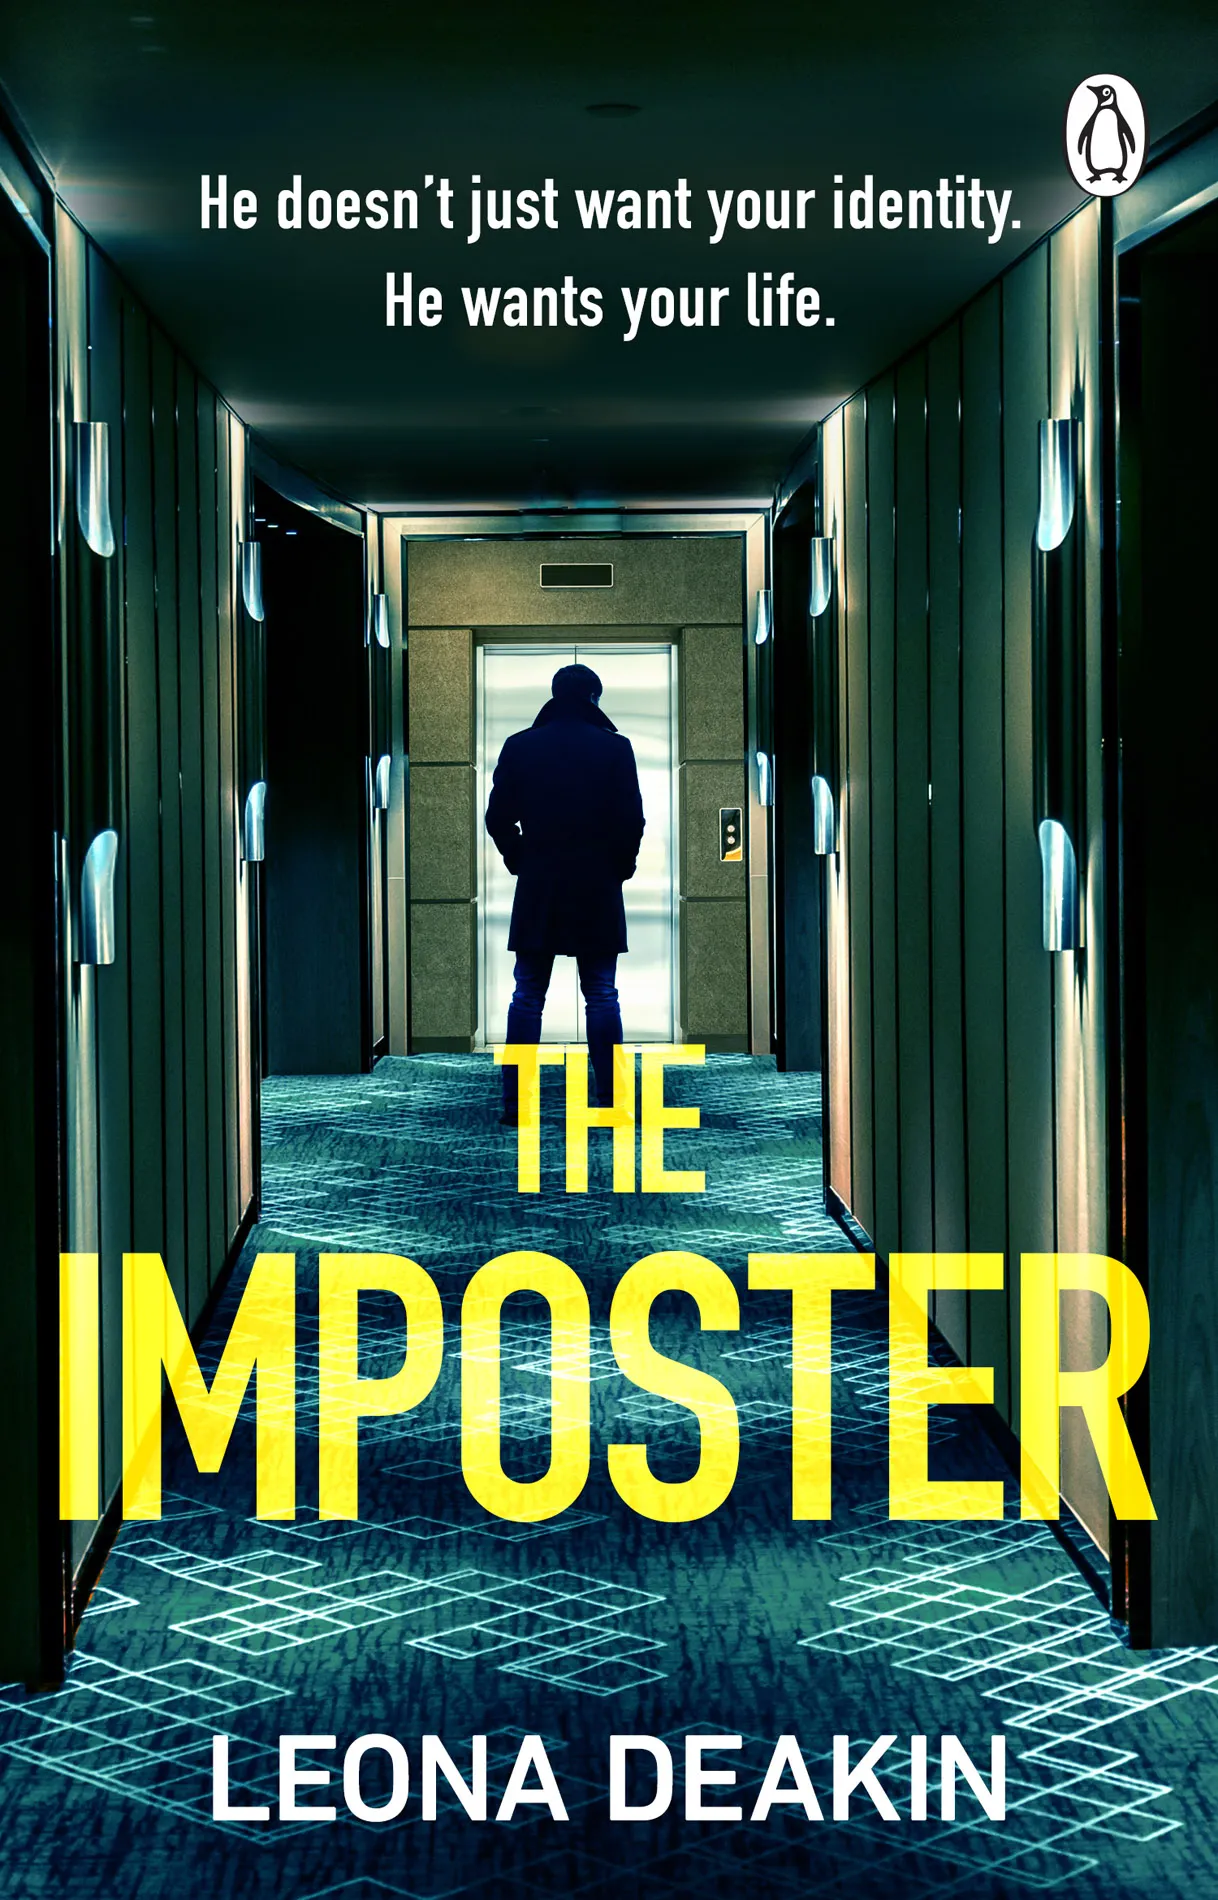 The Imposter (Dr Bloom #4)